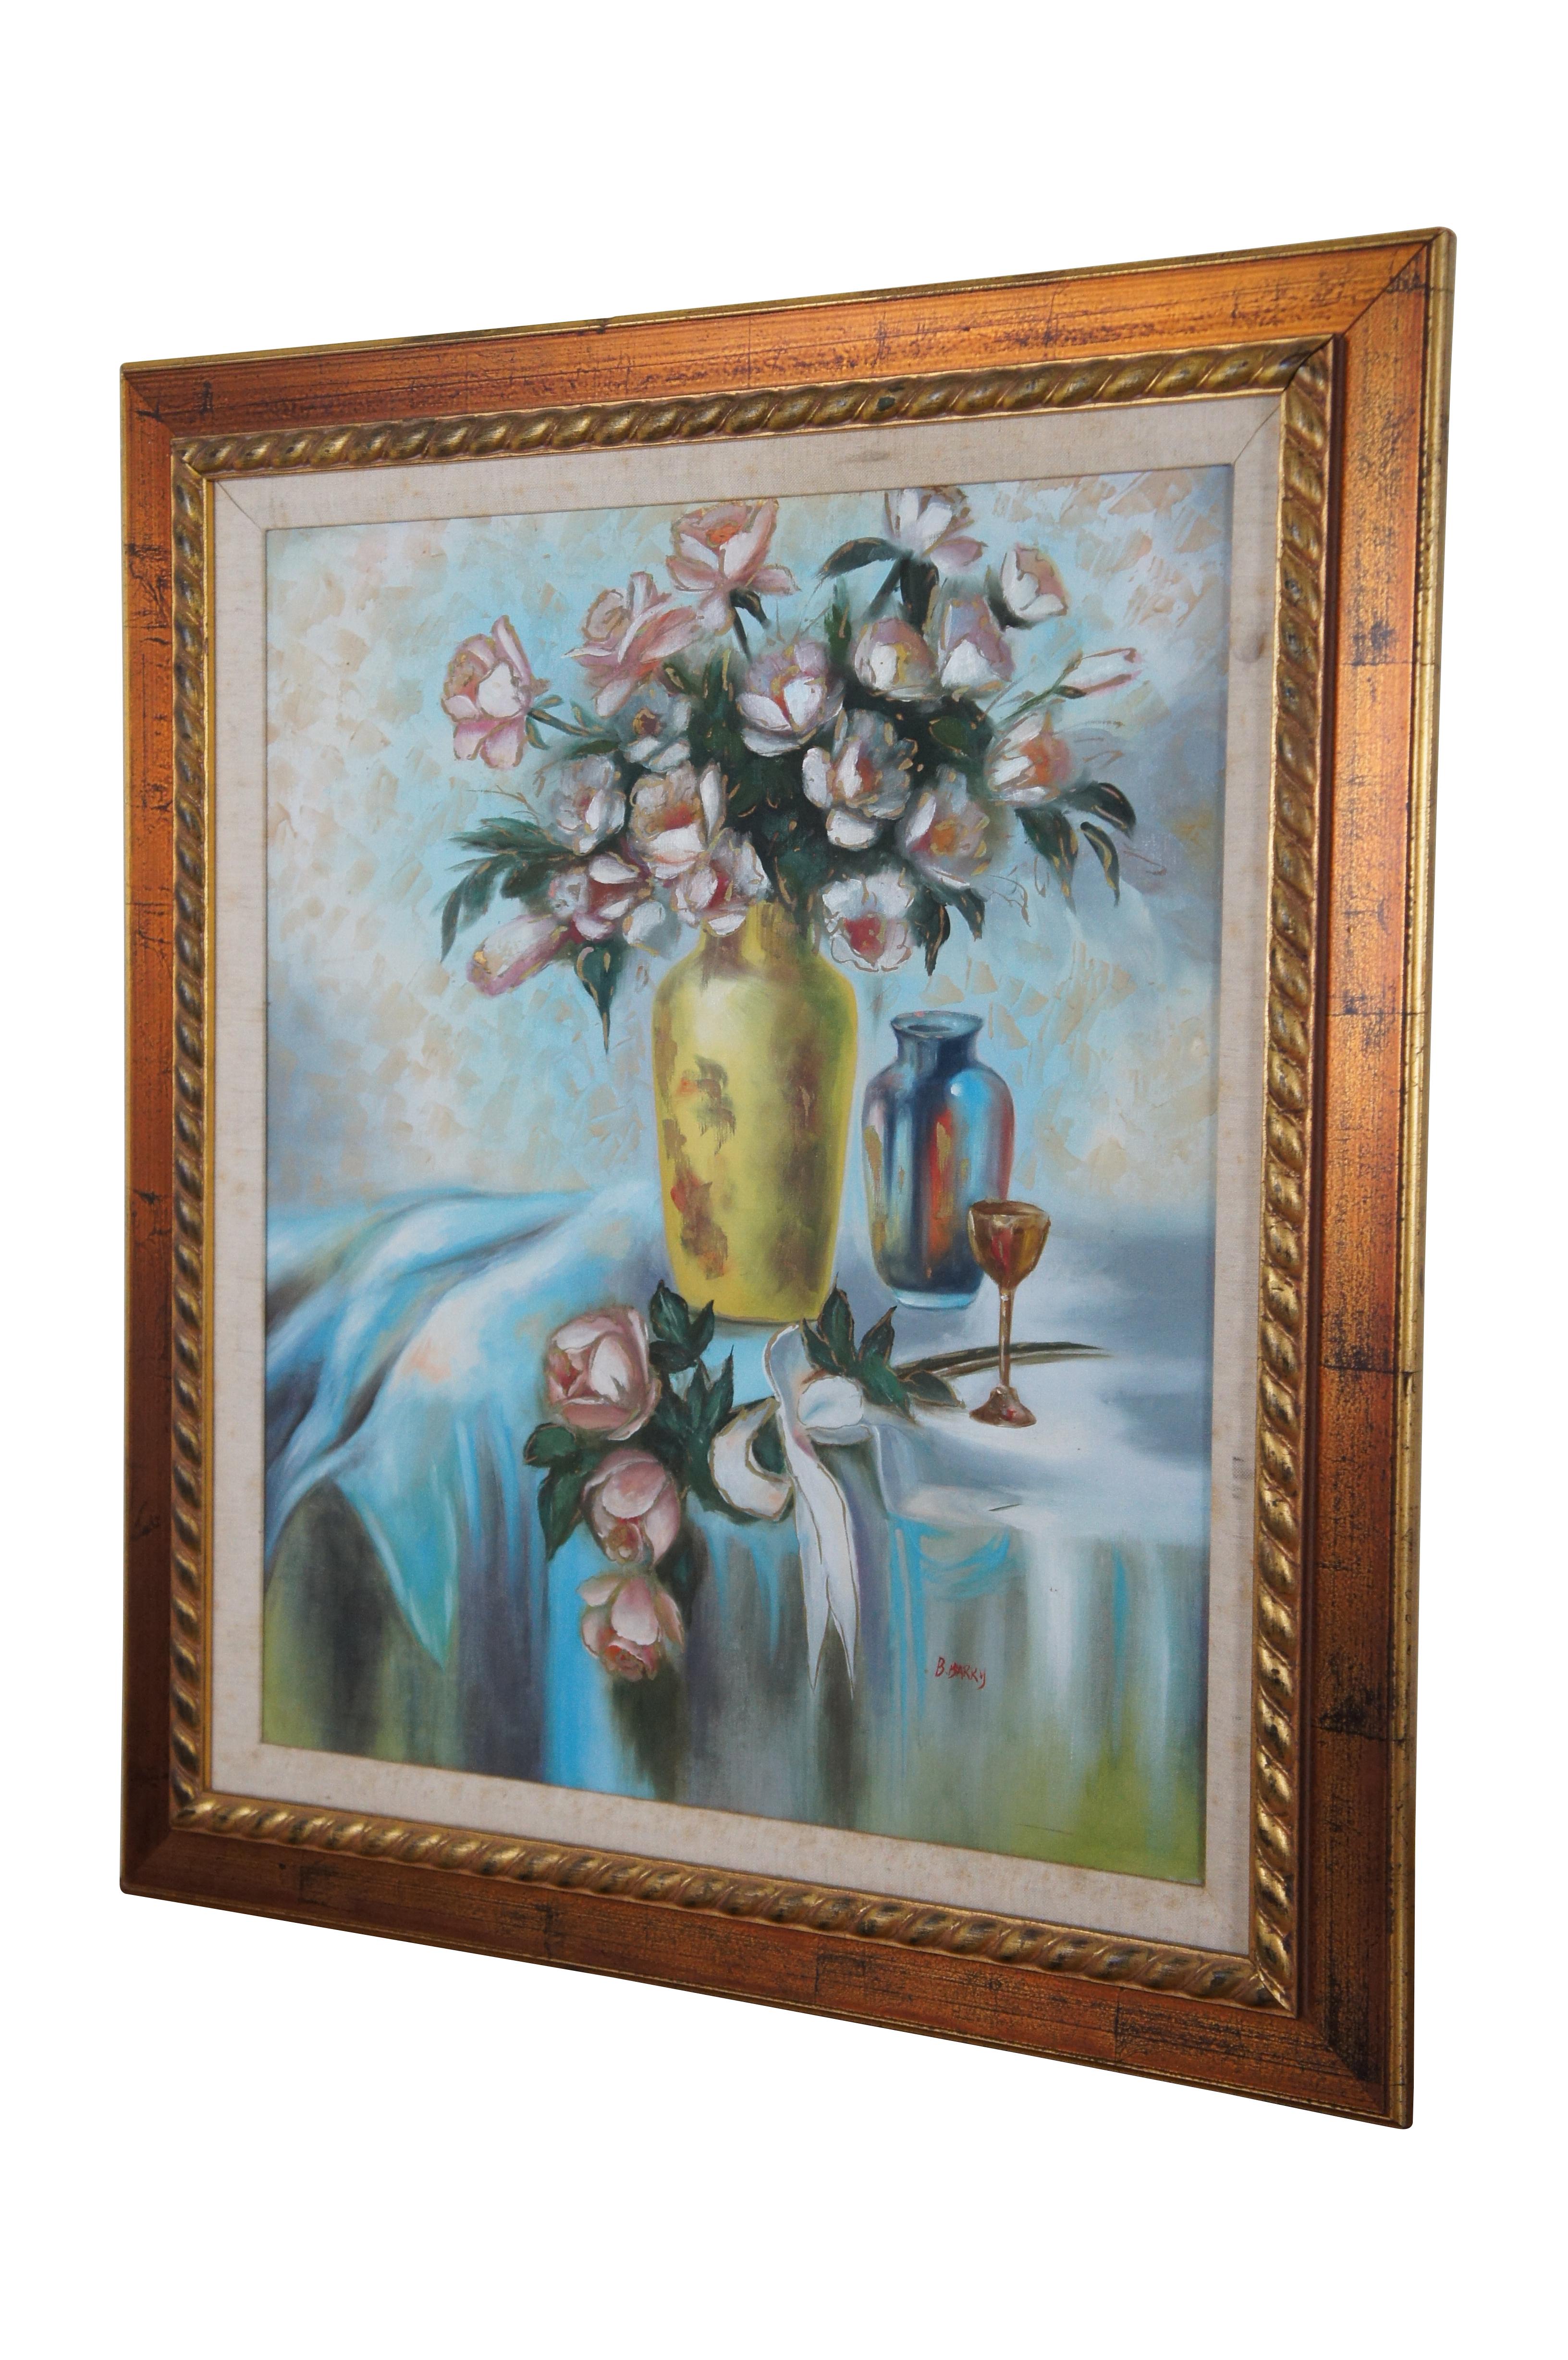 Vintage expressionist oil on canvas still life painting showing a bouquet of pink flowers in a yellow center vase, next to a vase and brass goblet on a blue and white tablecloth. Signed B. Barry in lower right. 

Dimensions:
26.5” x 1.25” x 30.5” /